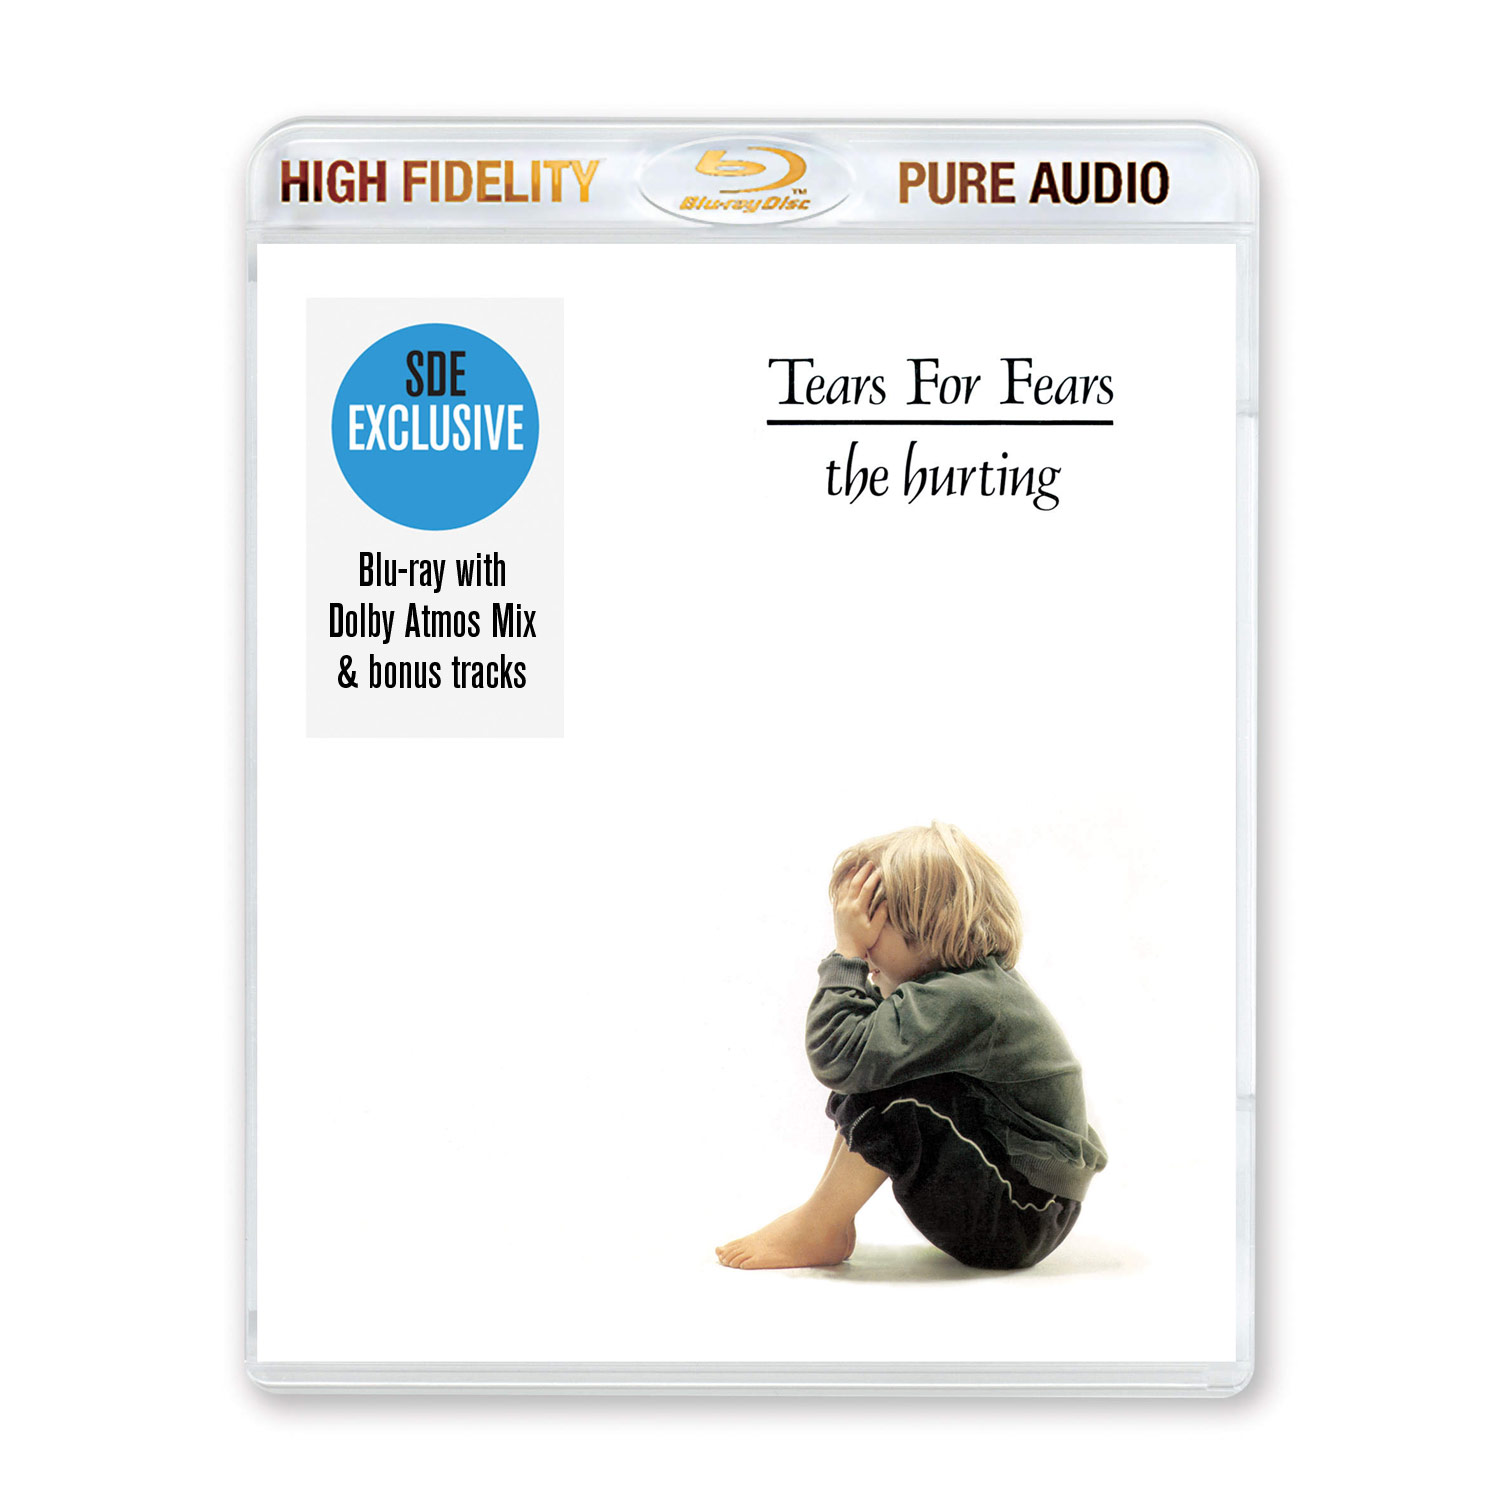 Tears For Fears / The Hurting on SDE-exclusive Blu-ray Audio 